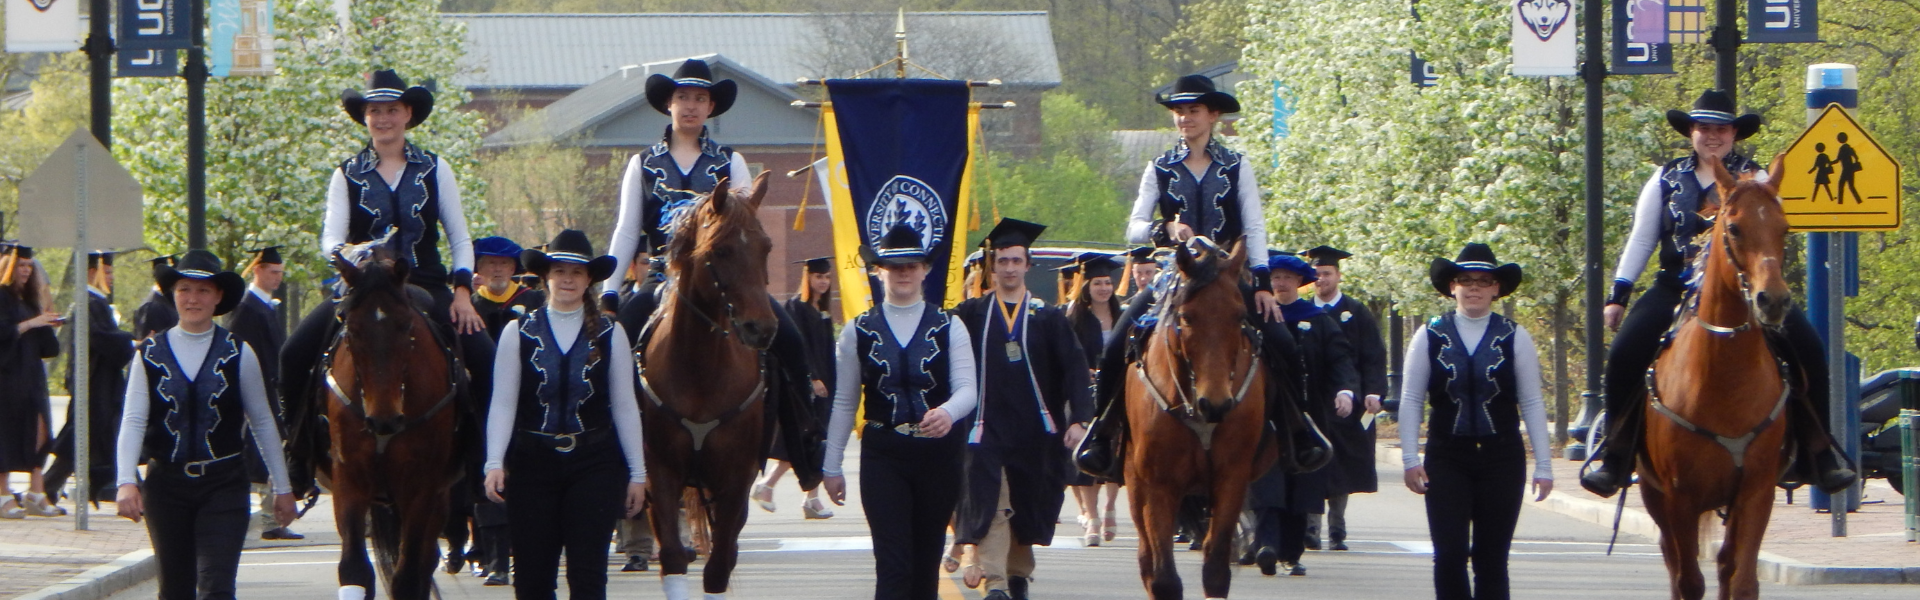 Students riding horses during commencement